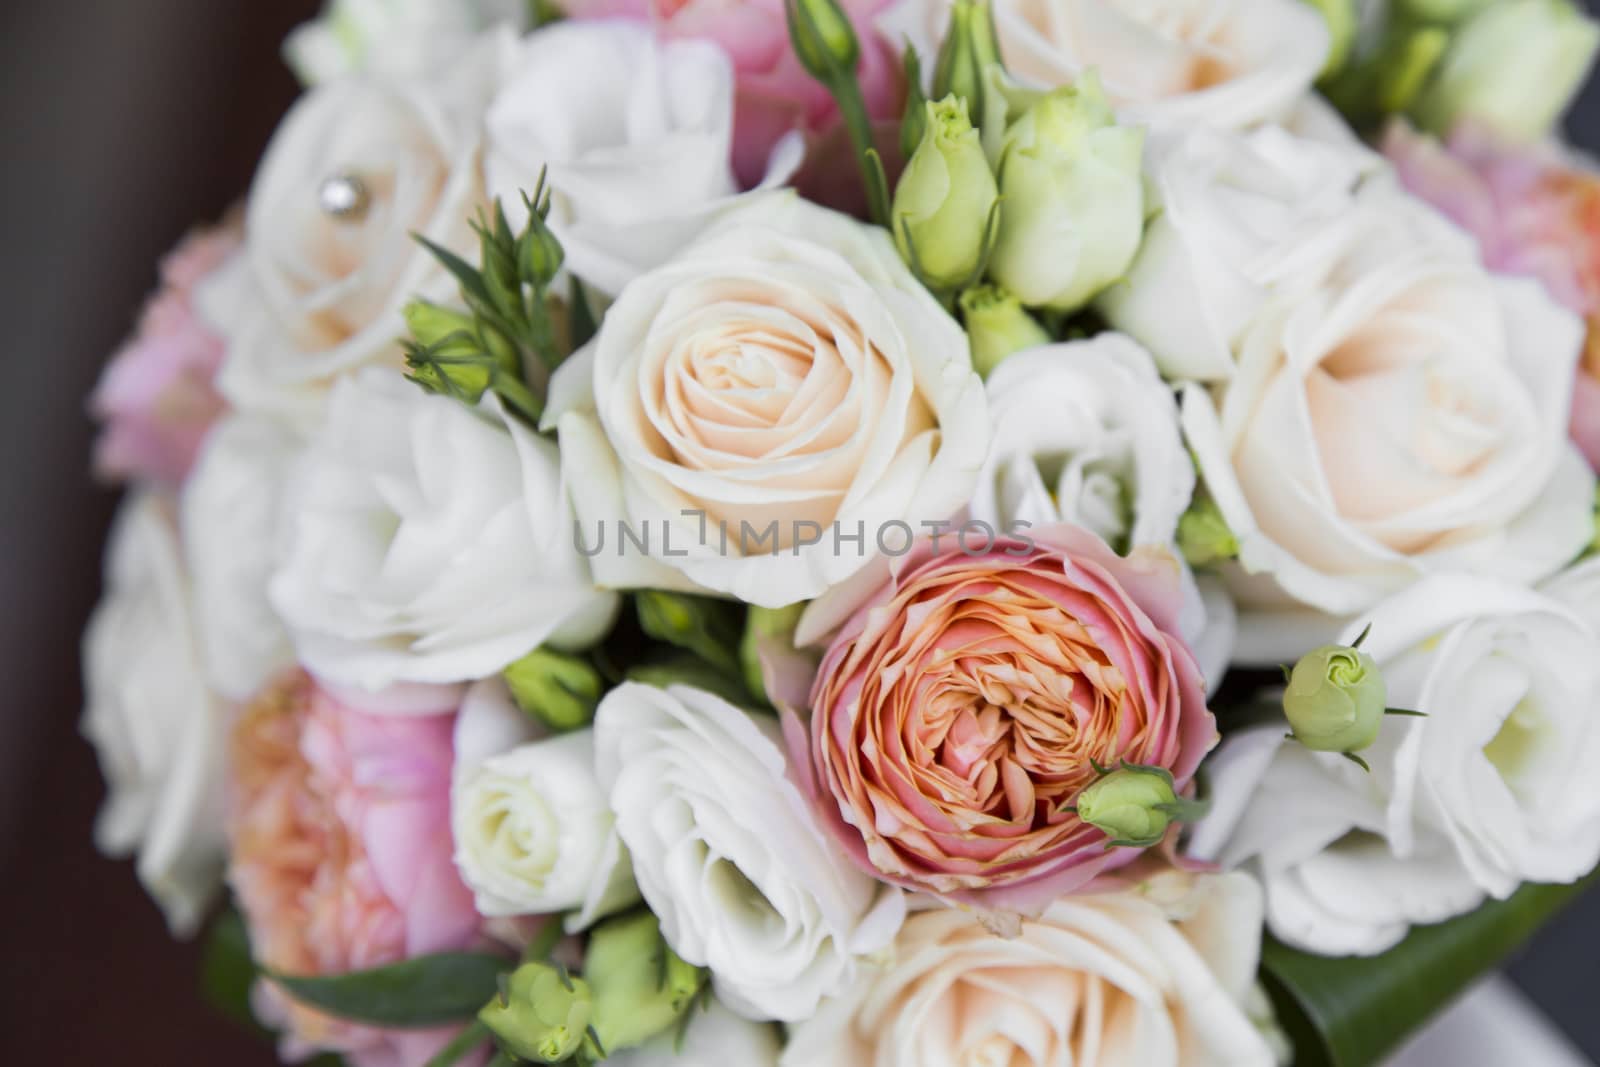 Close-up view of a bridal bouquet made of roses pale roses